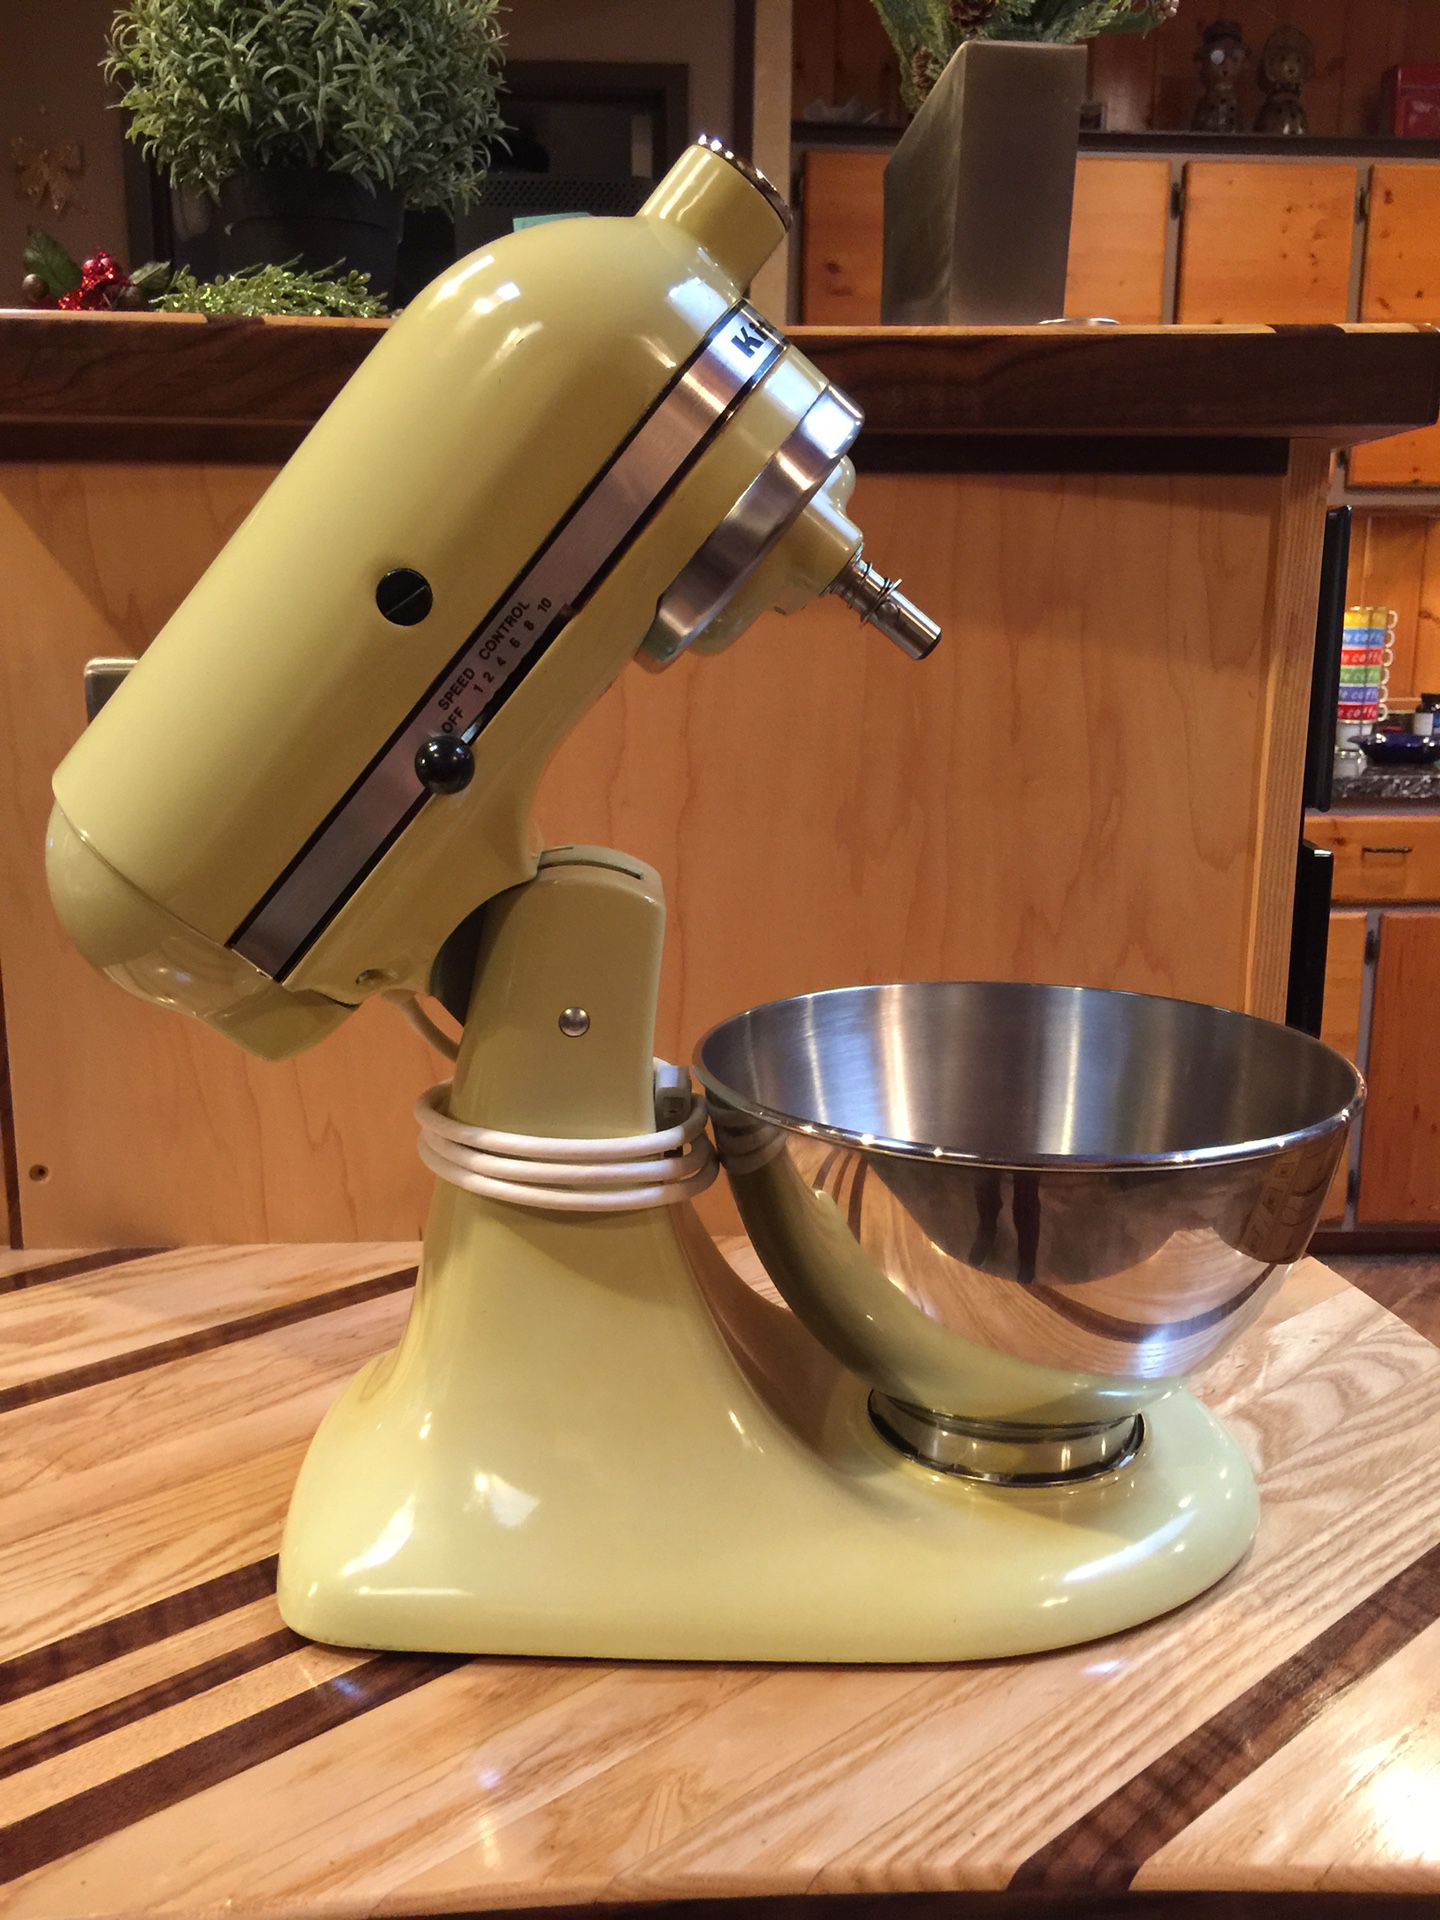 VINTAGE KITCHENAID 10 SPEED MIXER K45 Made in USA By THE HOBART MFG. CO  TROY OH $139.99 - PicClick